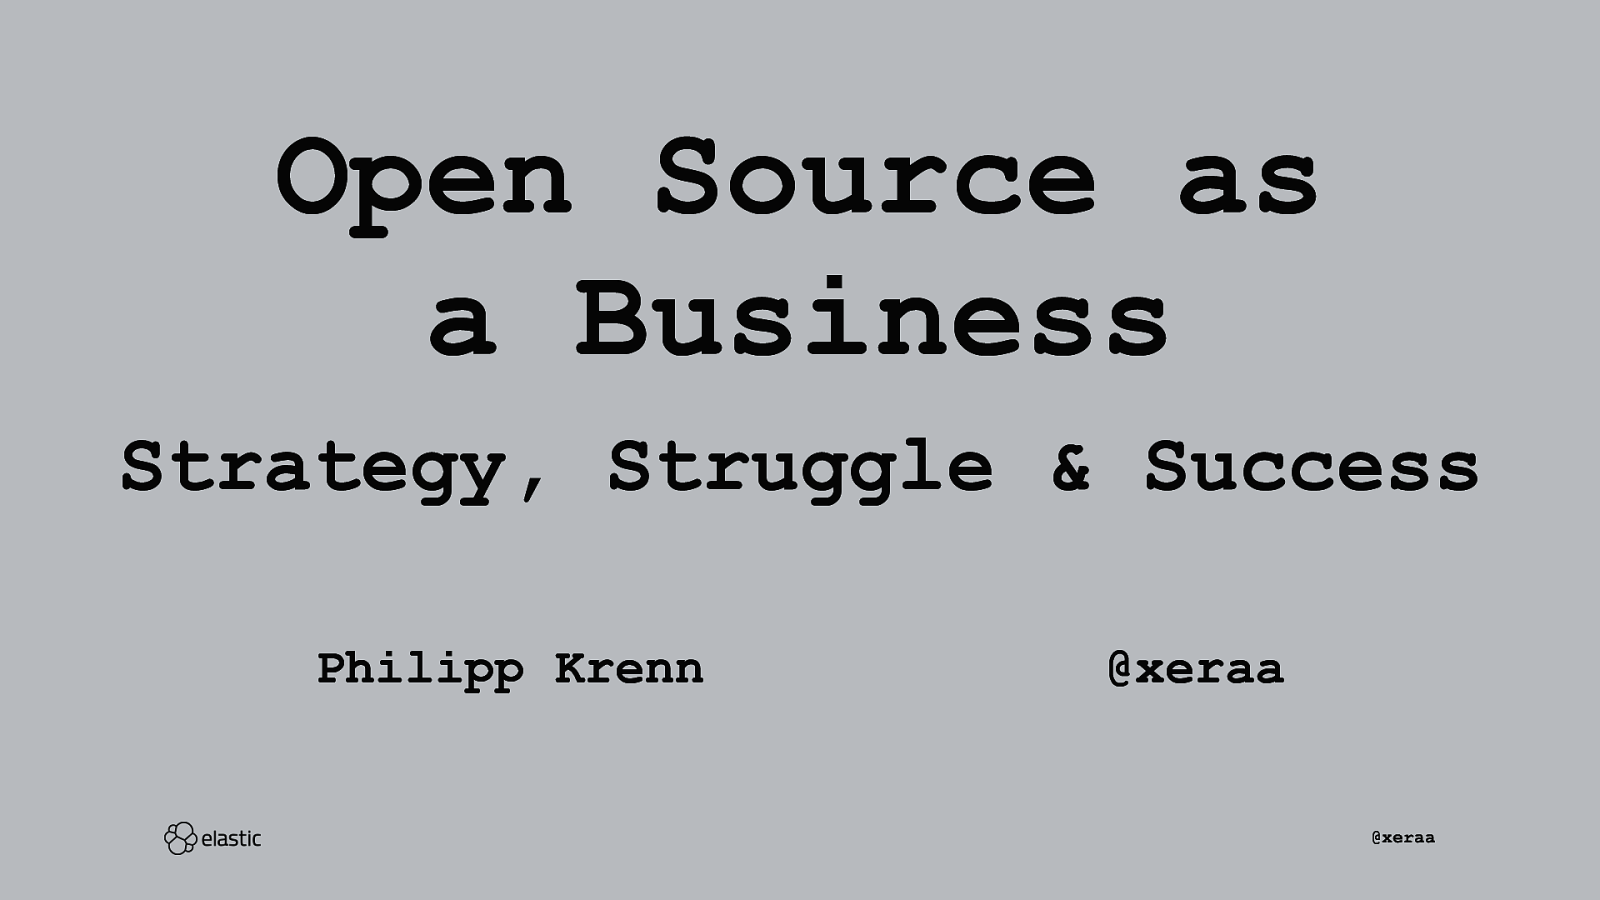 Open Source as a Business